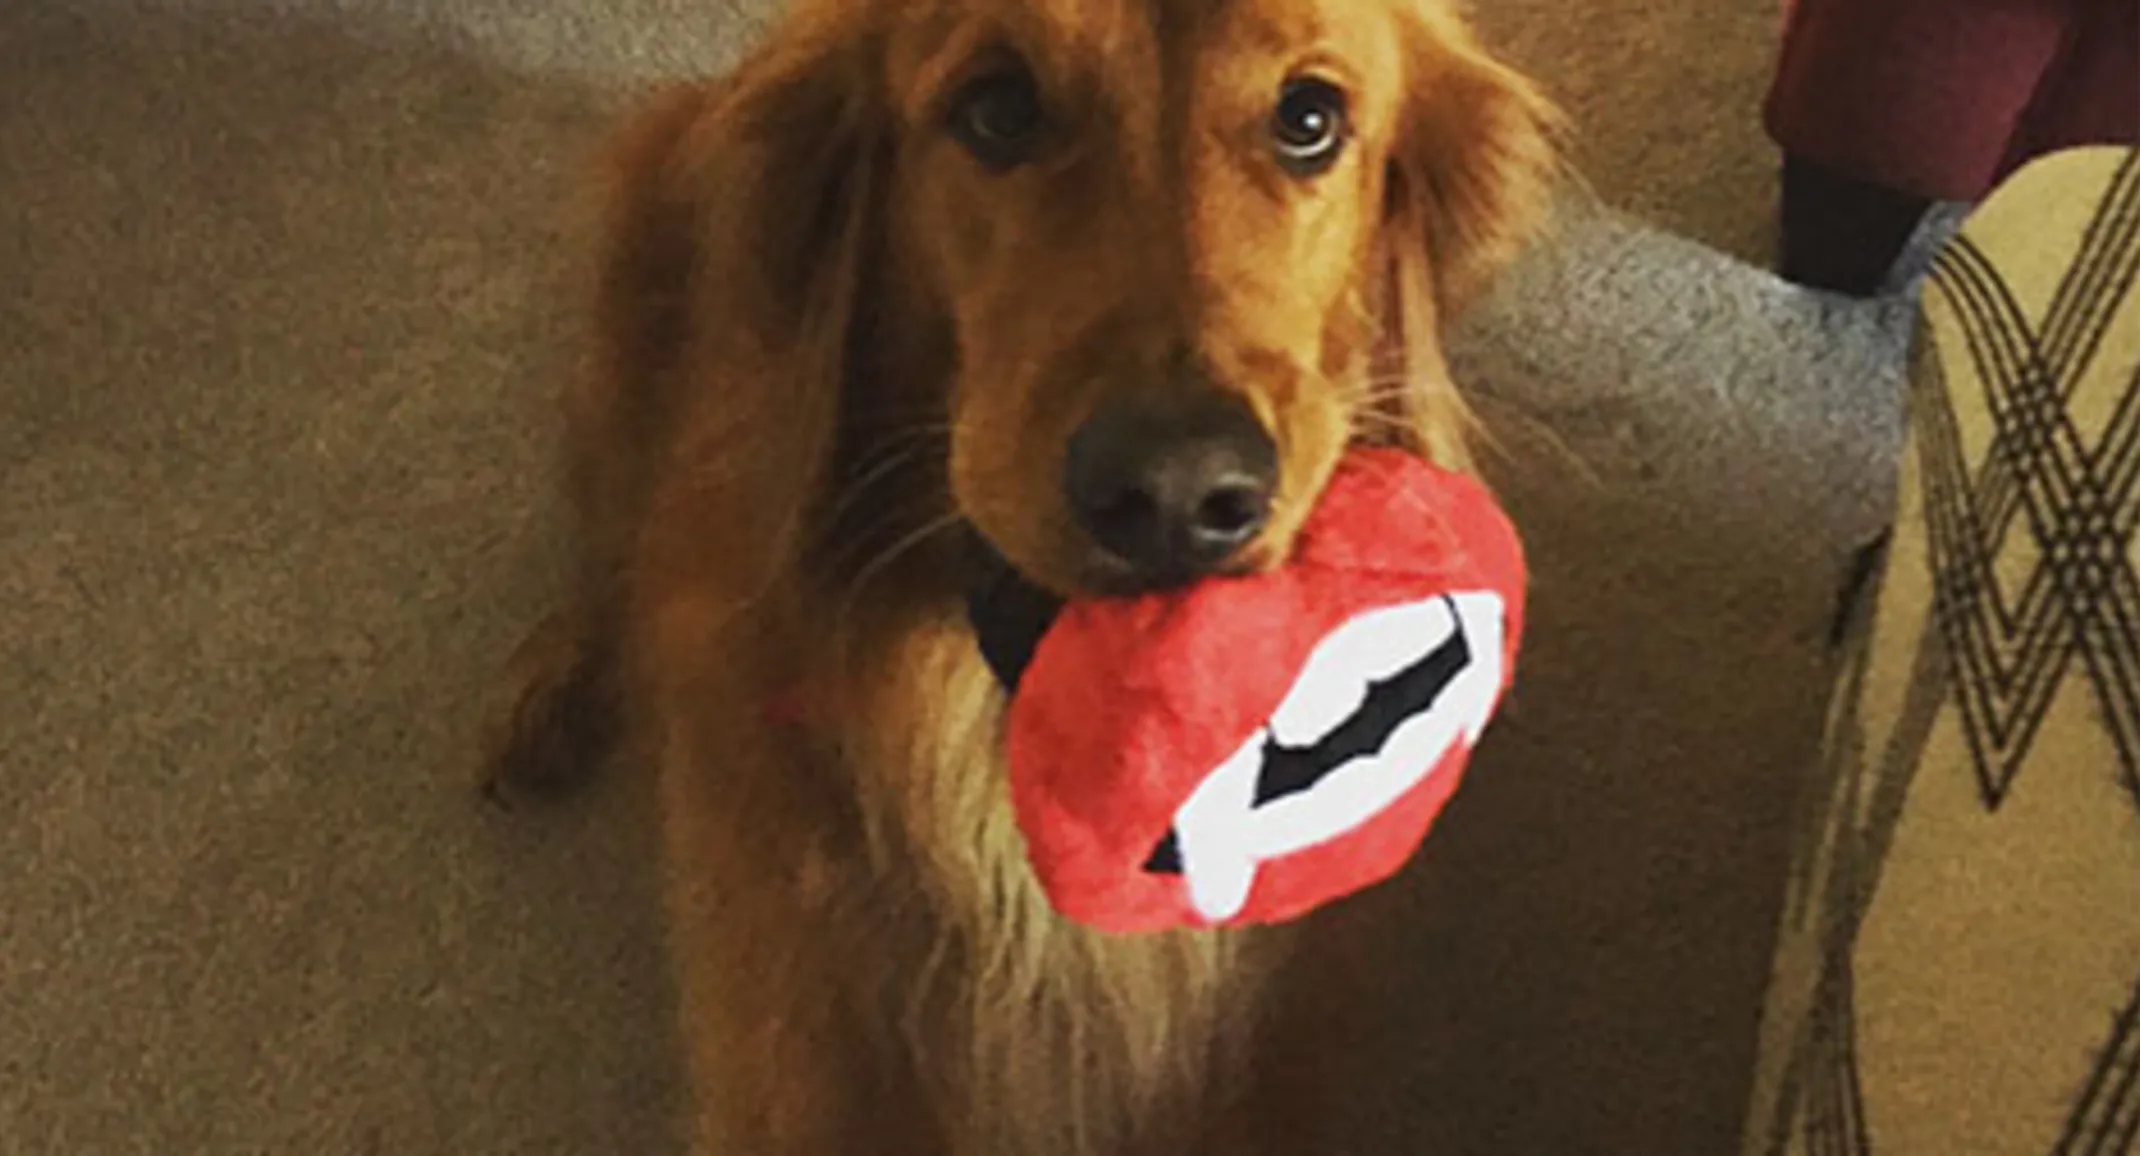 Golden retriever on carpet holding mouth-shaped toy